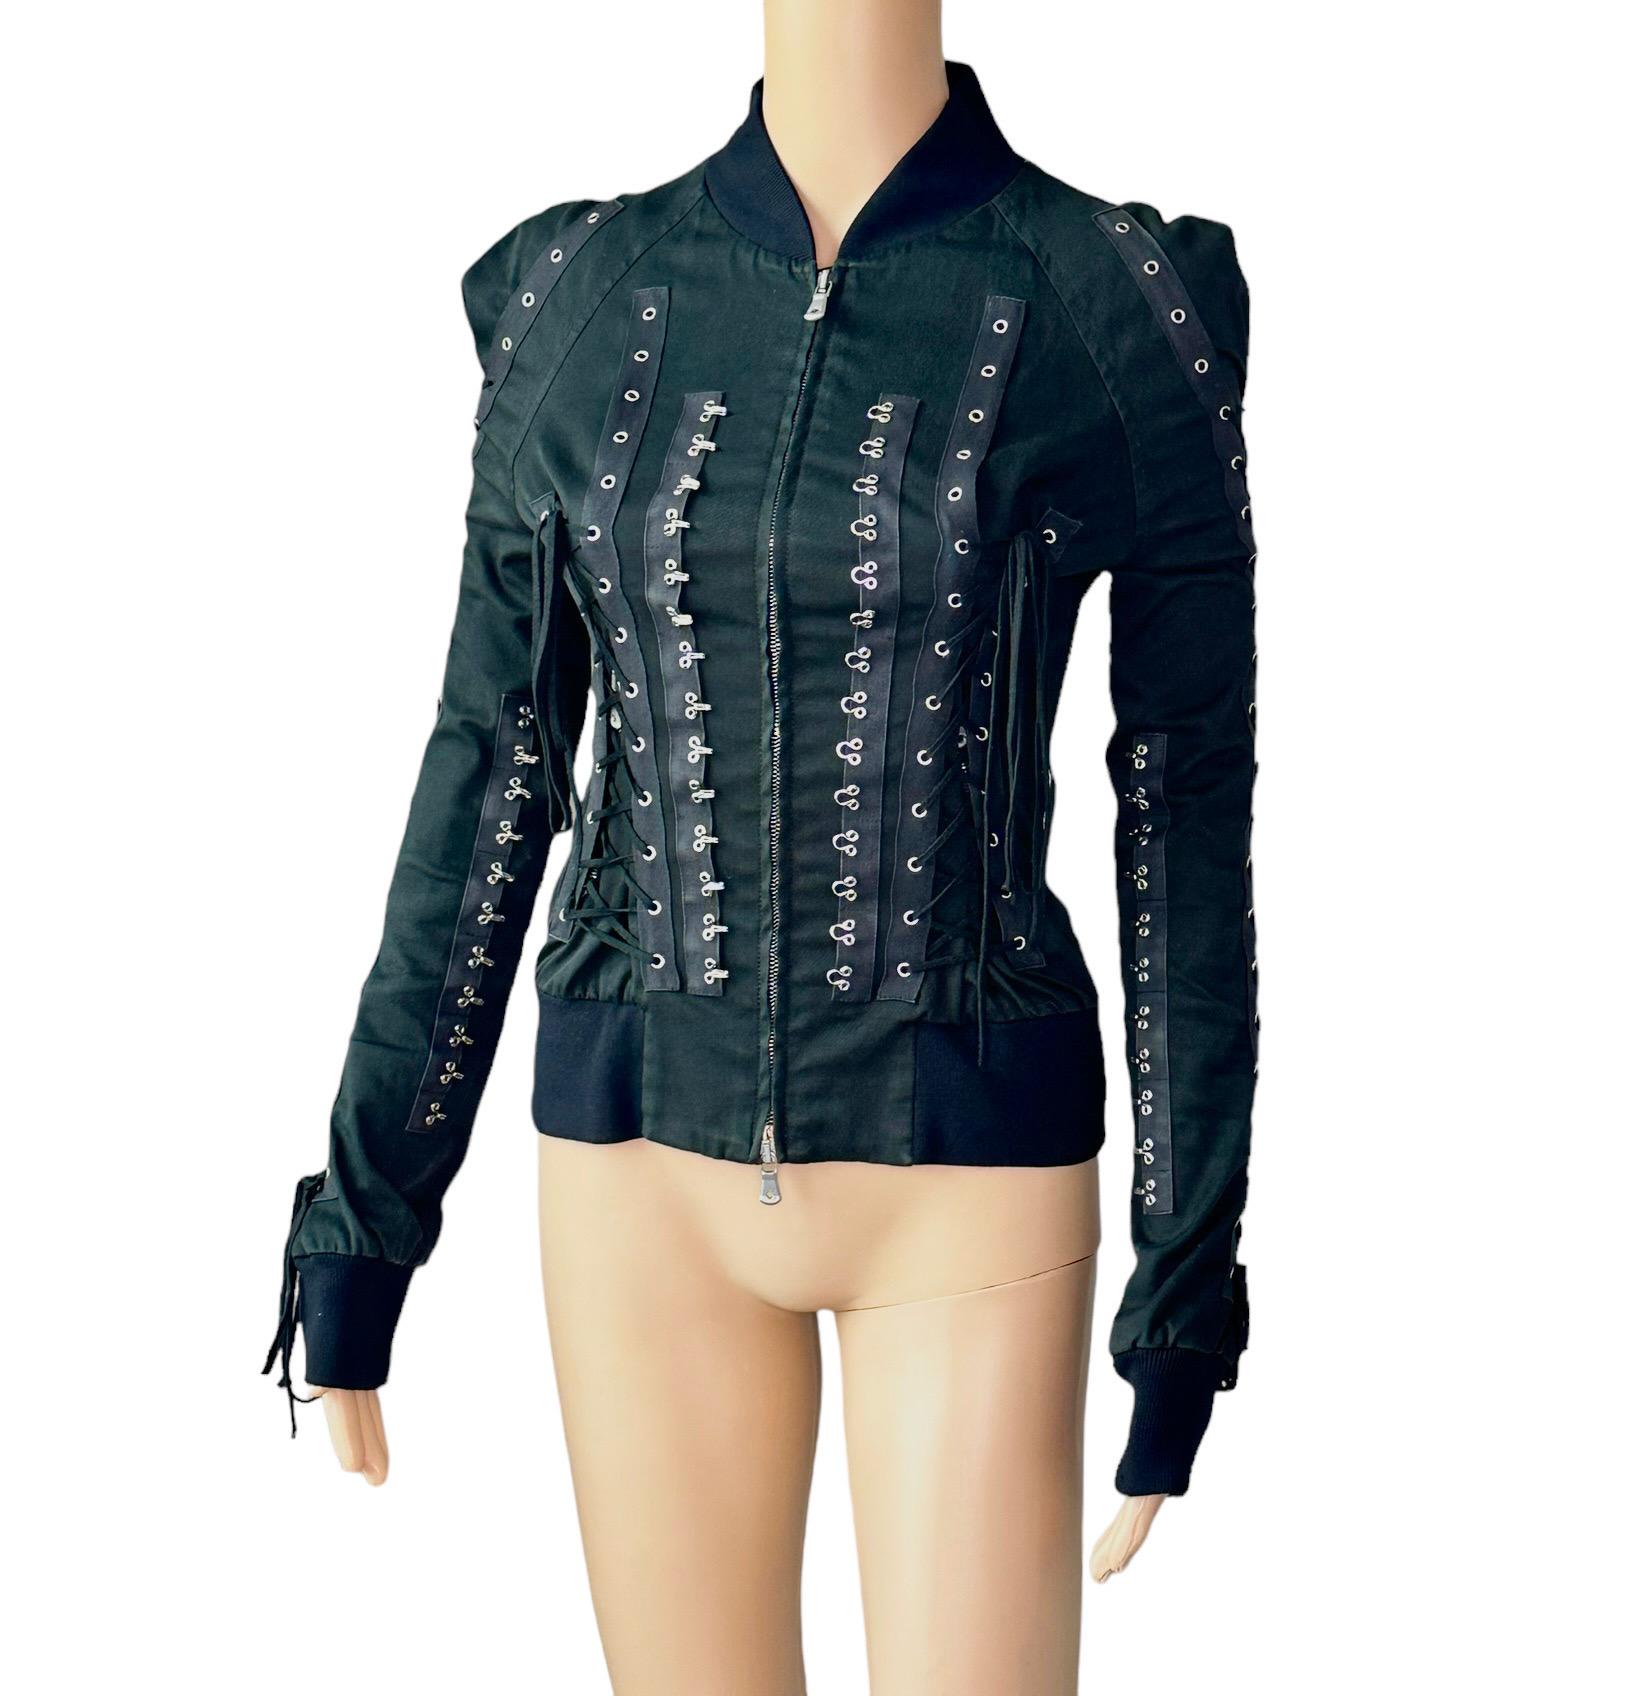 Dolce & Gabbana F/W 2003 Corset Lace Up Hook and Eye Black Top Jacket For Sale 3